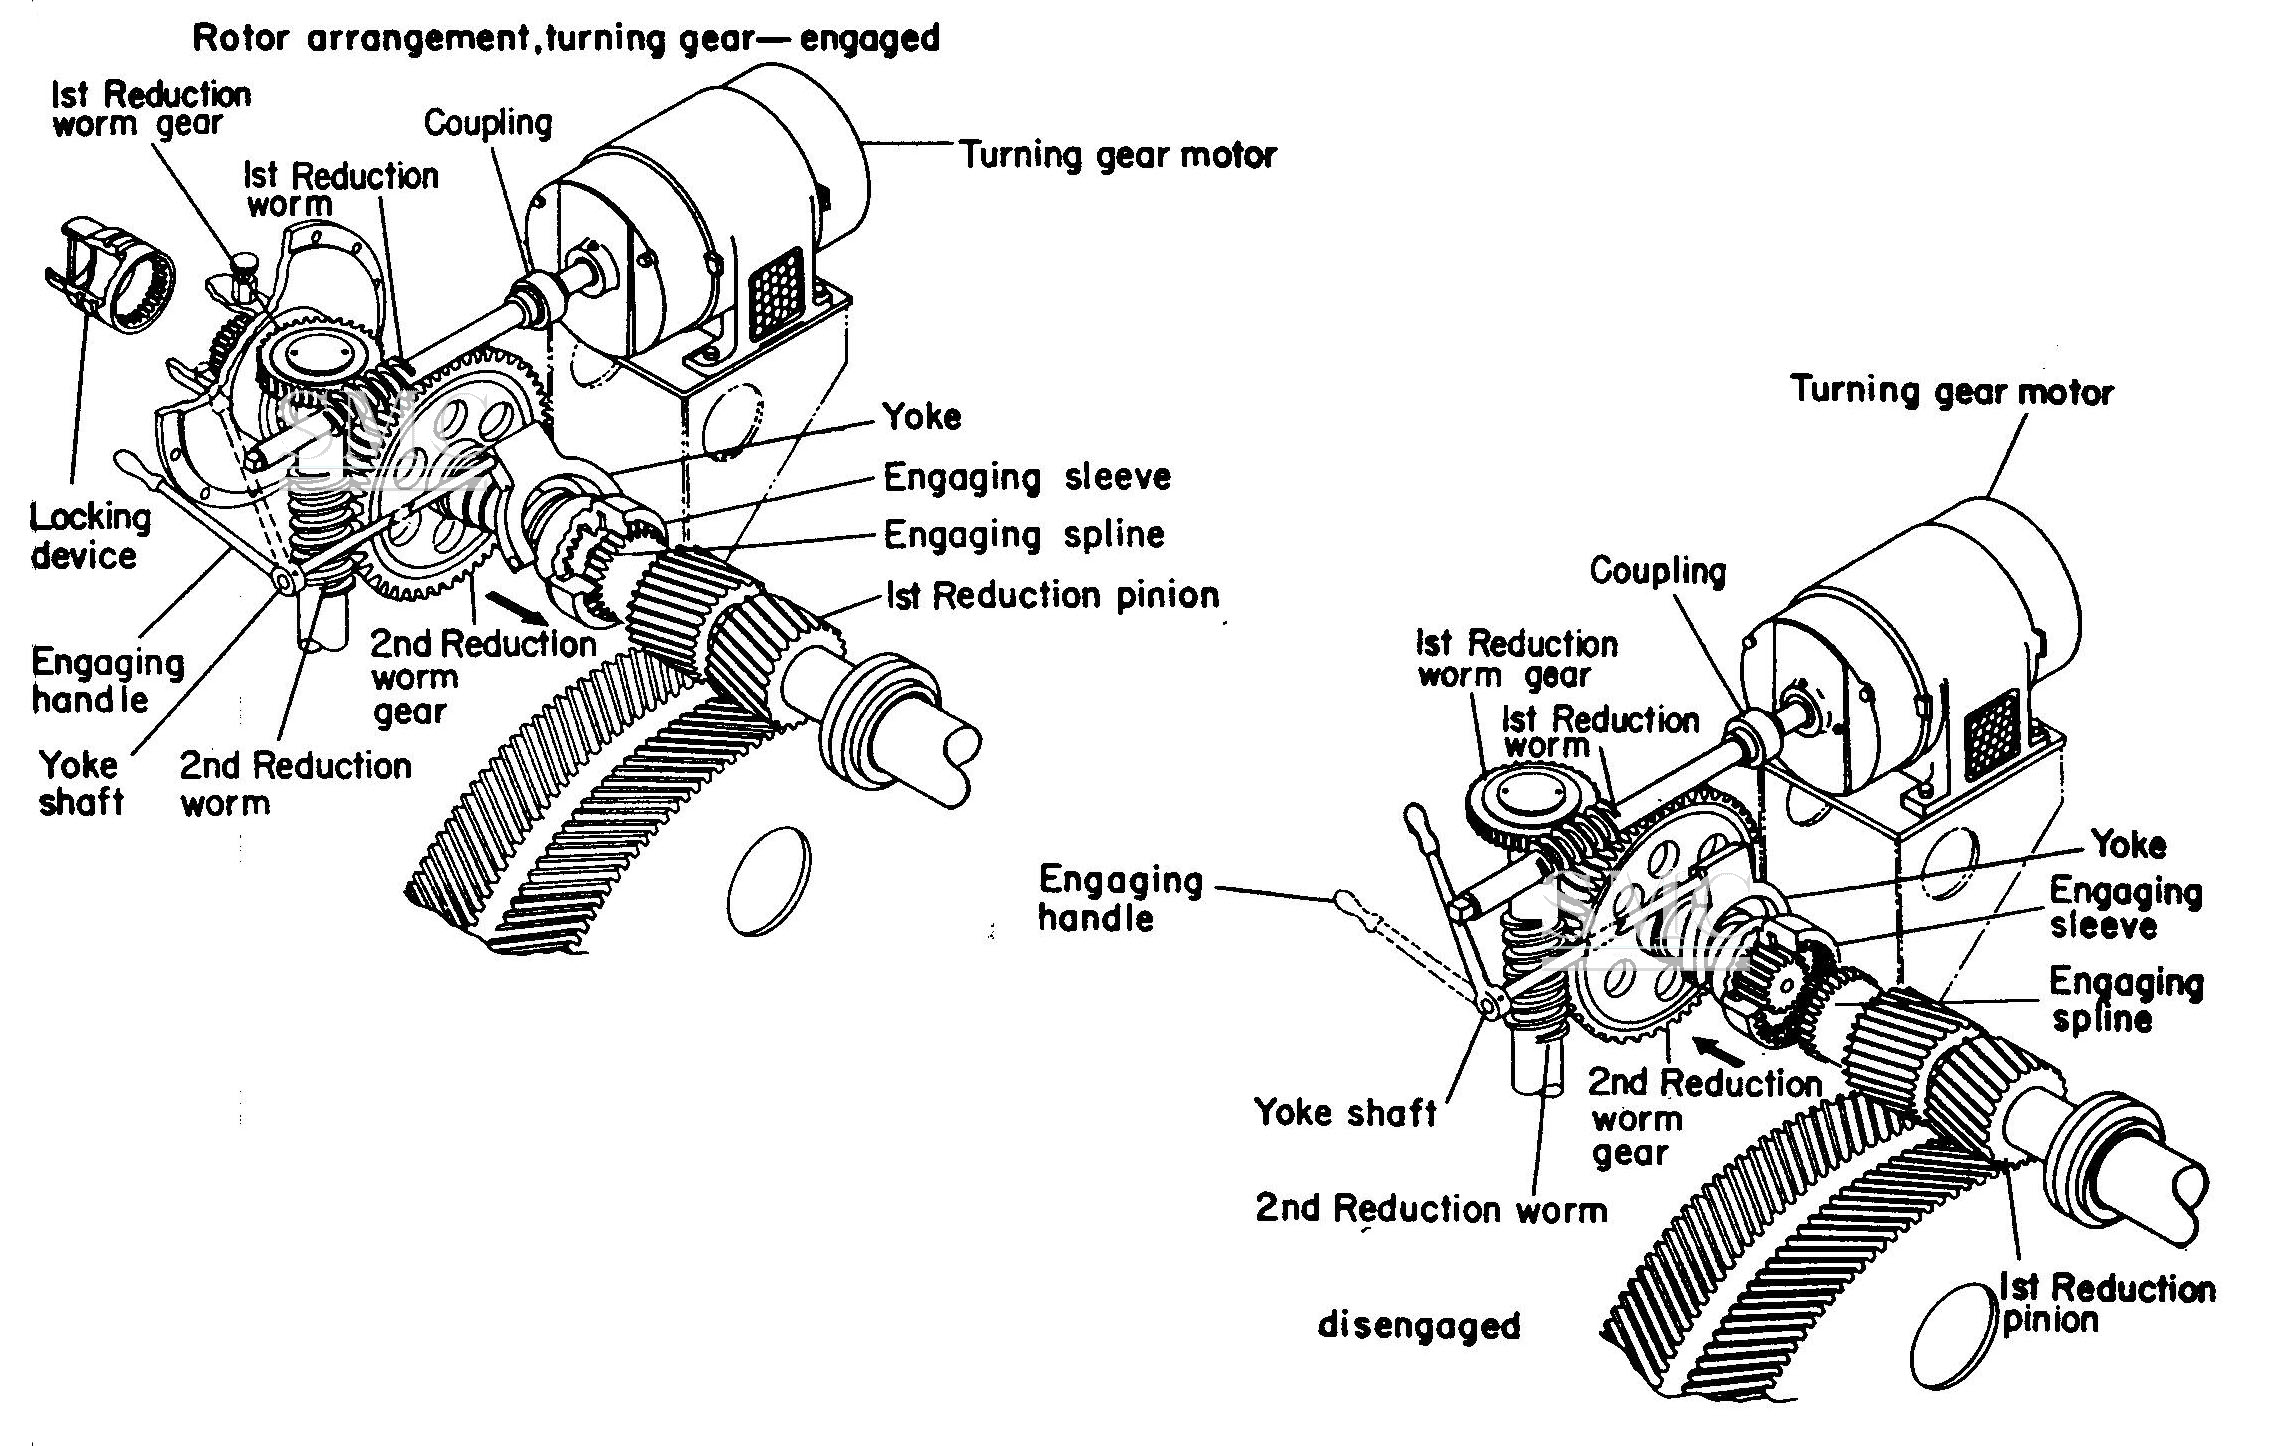 The major purposes of turning gear operation during turbine startup